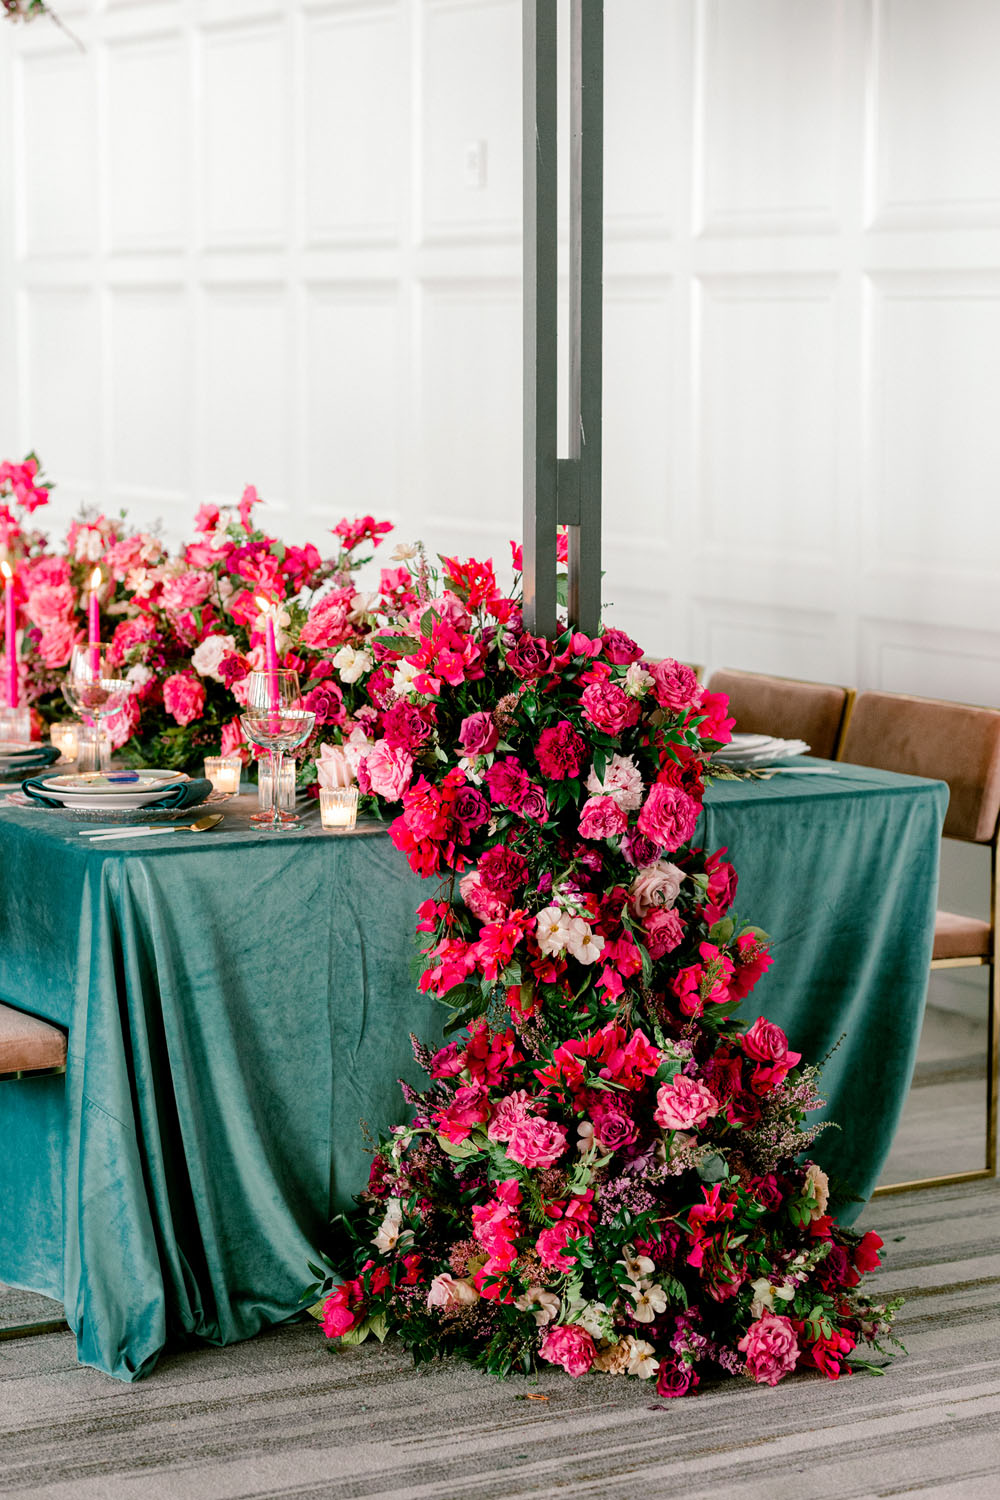 How to use the 2023 Pantone Color of the Year in your wedding